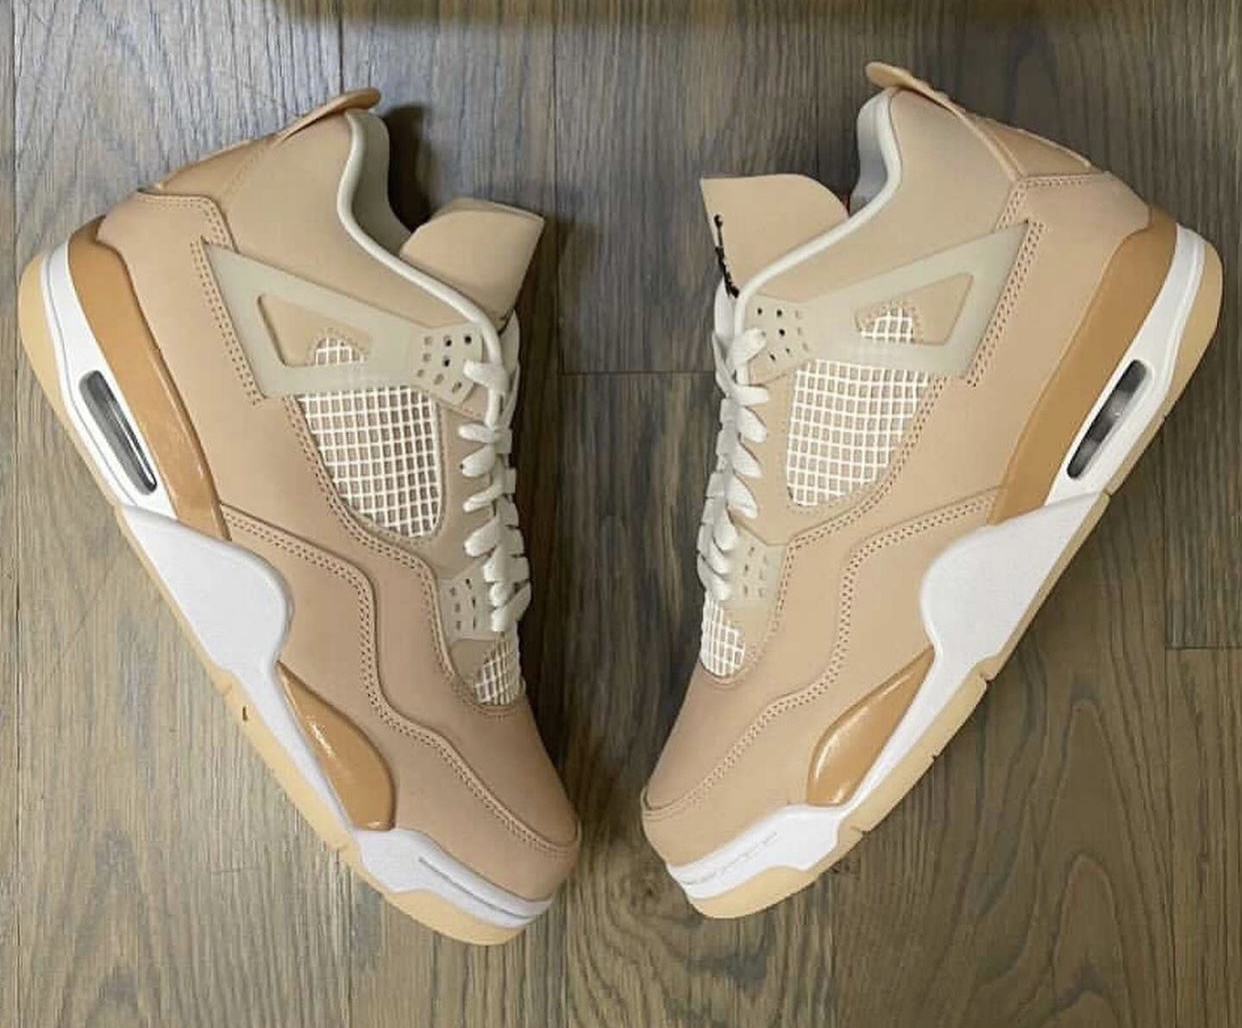 Keep scrolling to take a deep dive into some of the best Air Jordan 4s of all time Shimmer WMNS DJ0675-200 Release Date